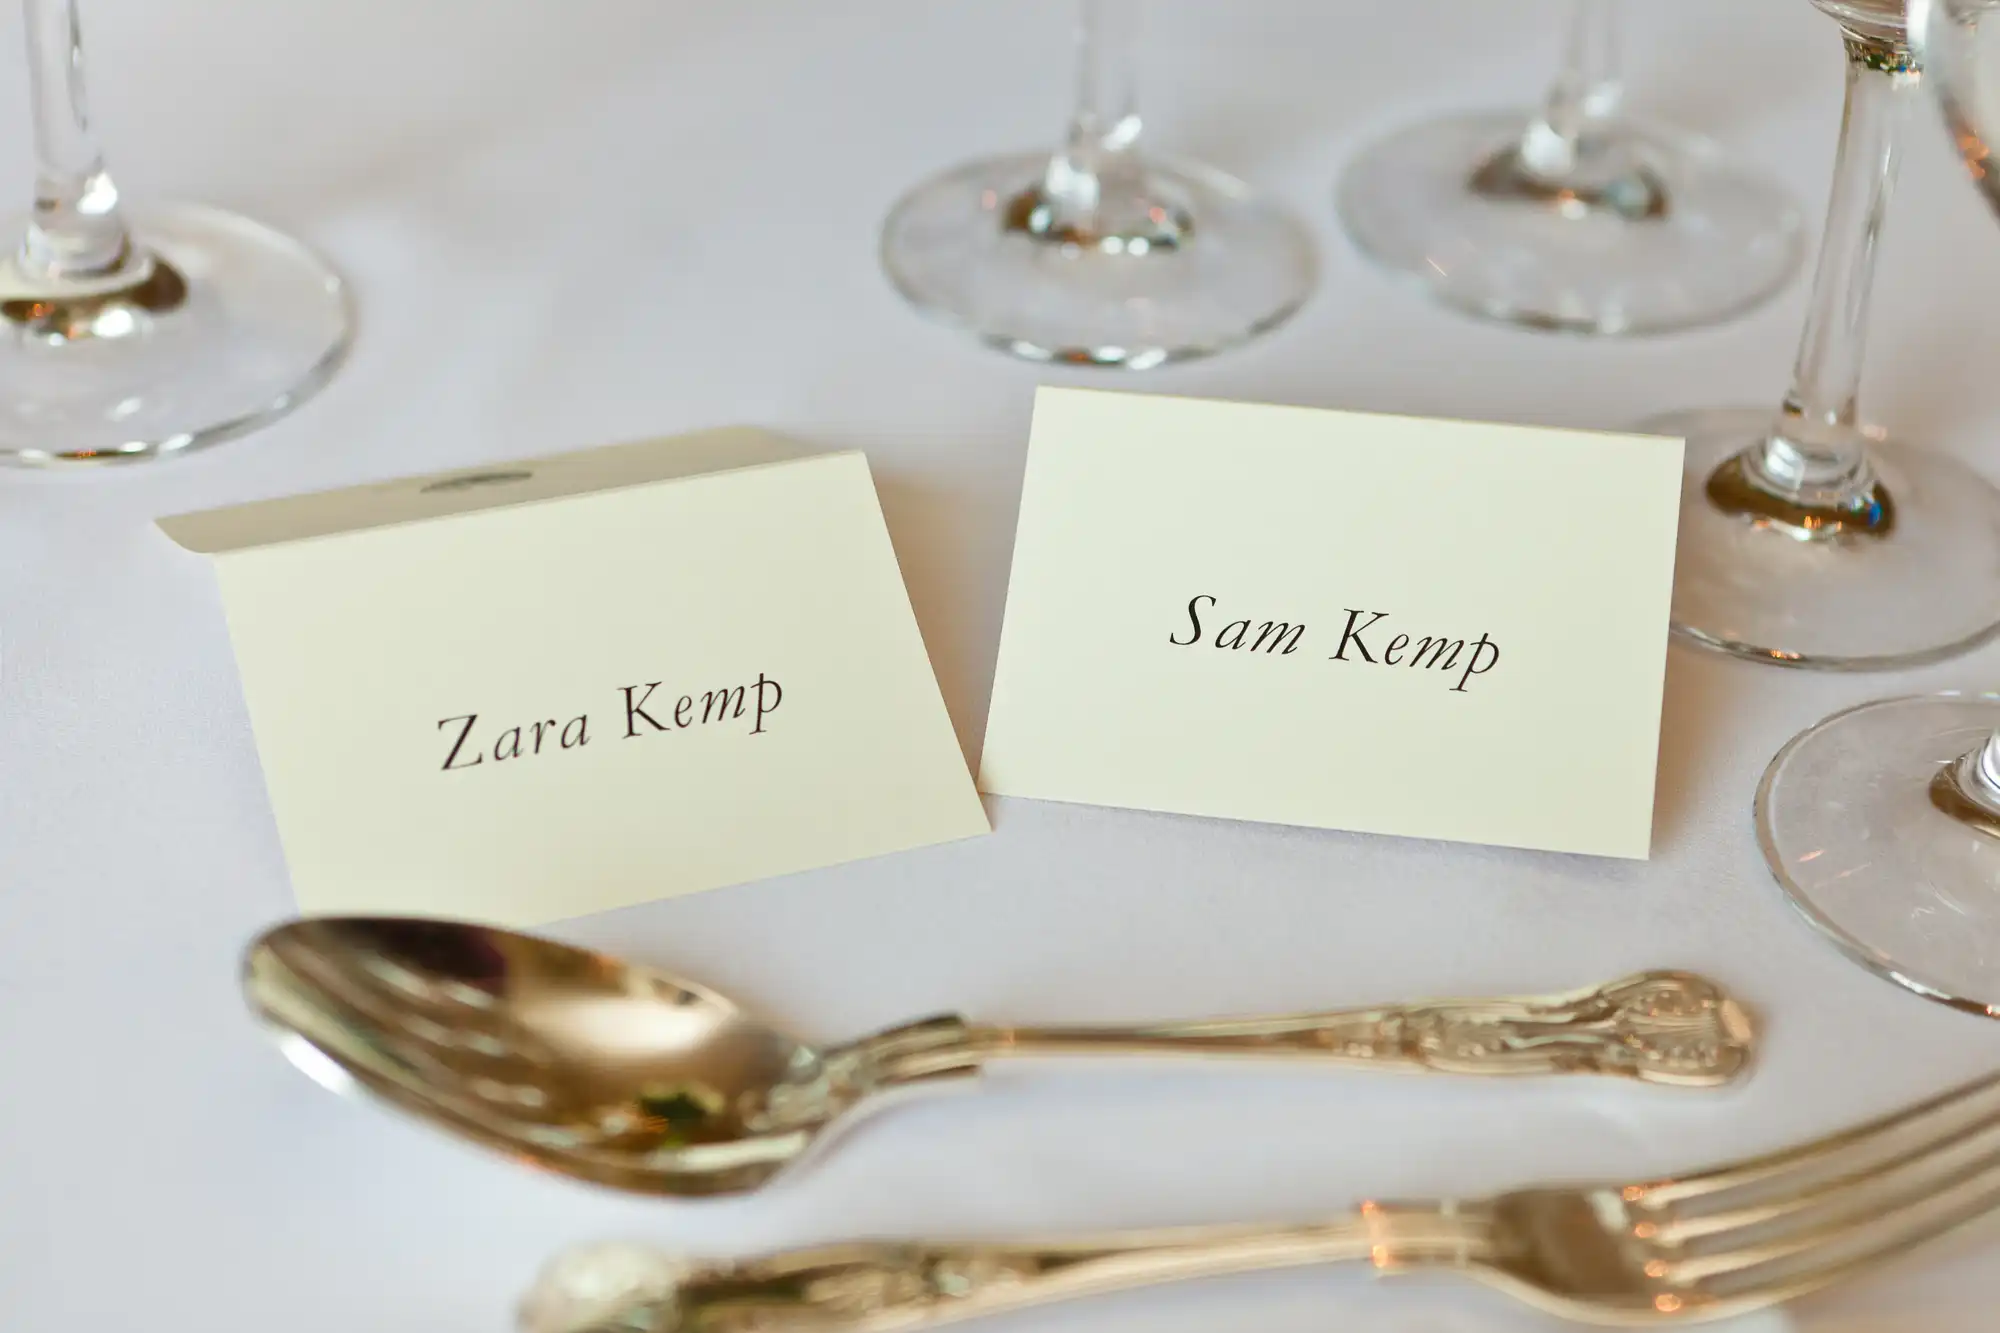 Place cards with names "zara kemp" and "sam kemp" on a formal dining table with silverware and wine glasses.